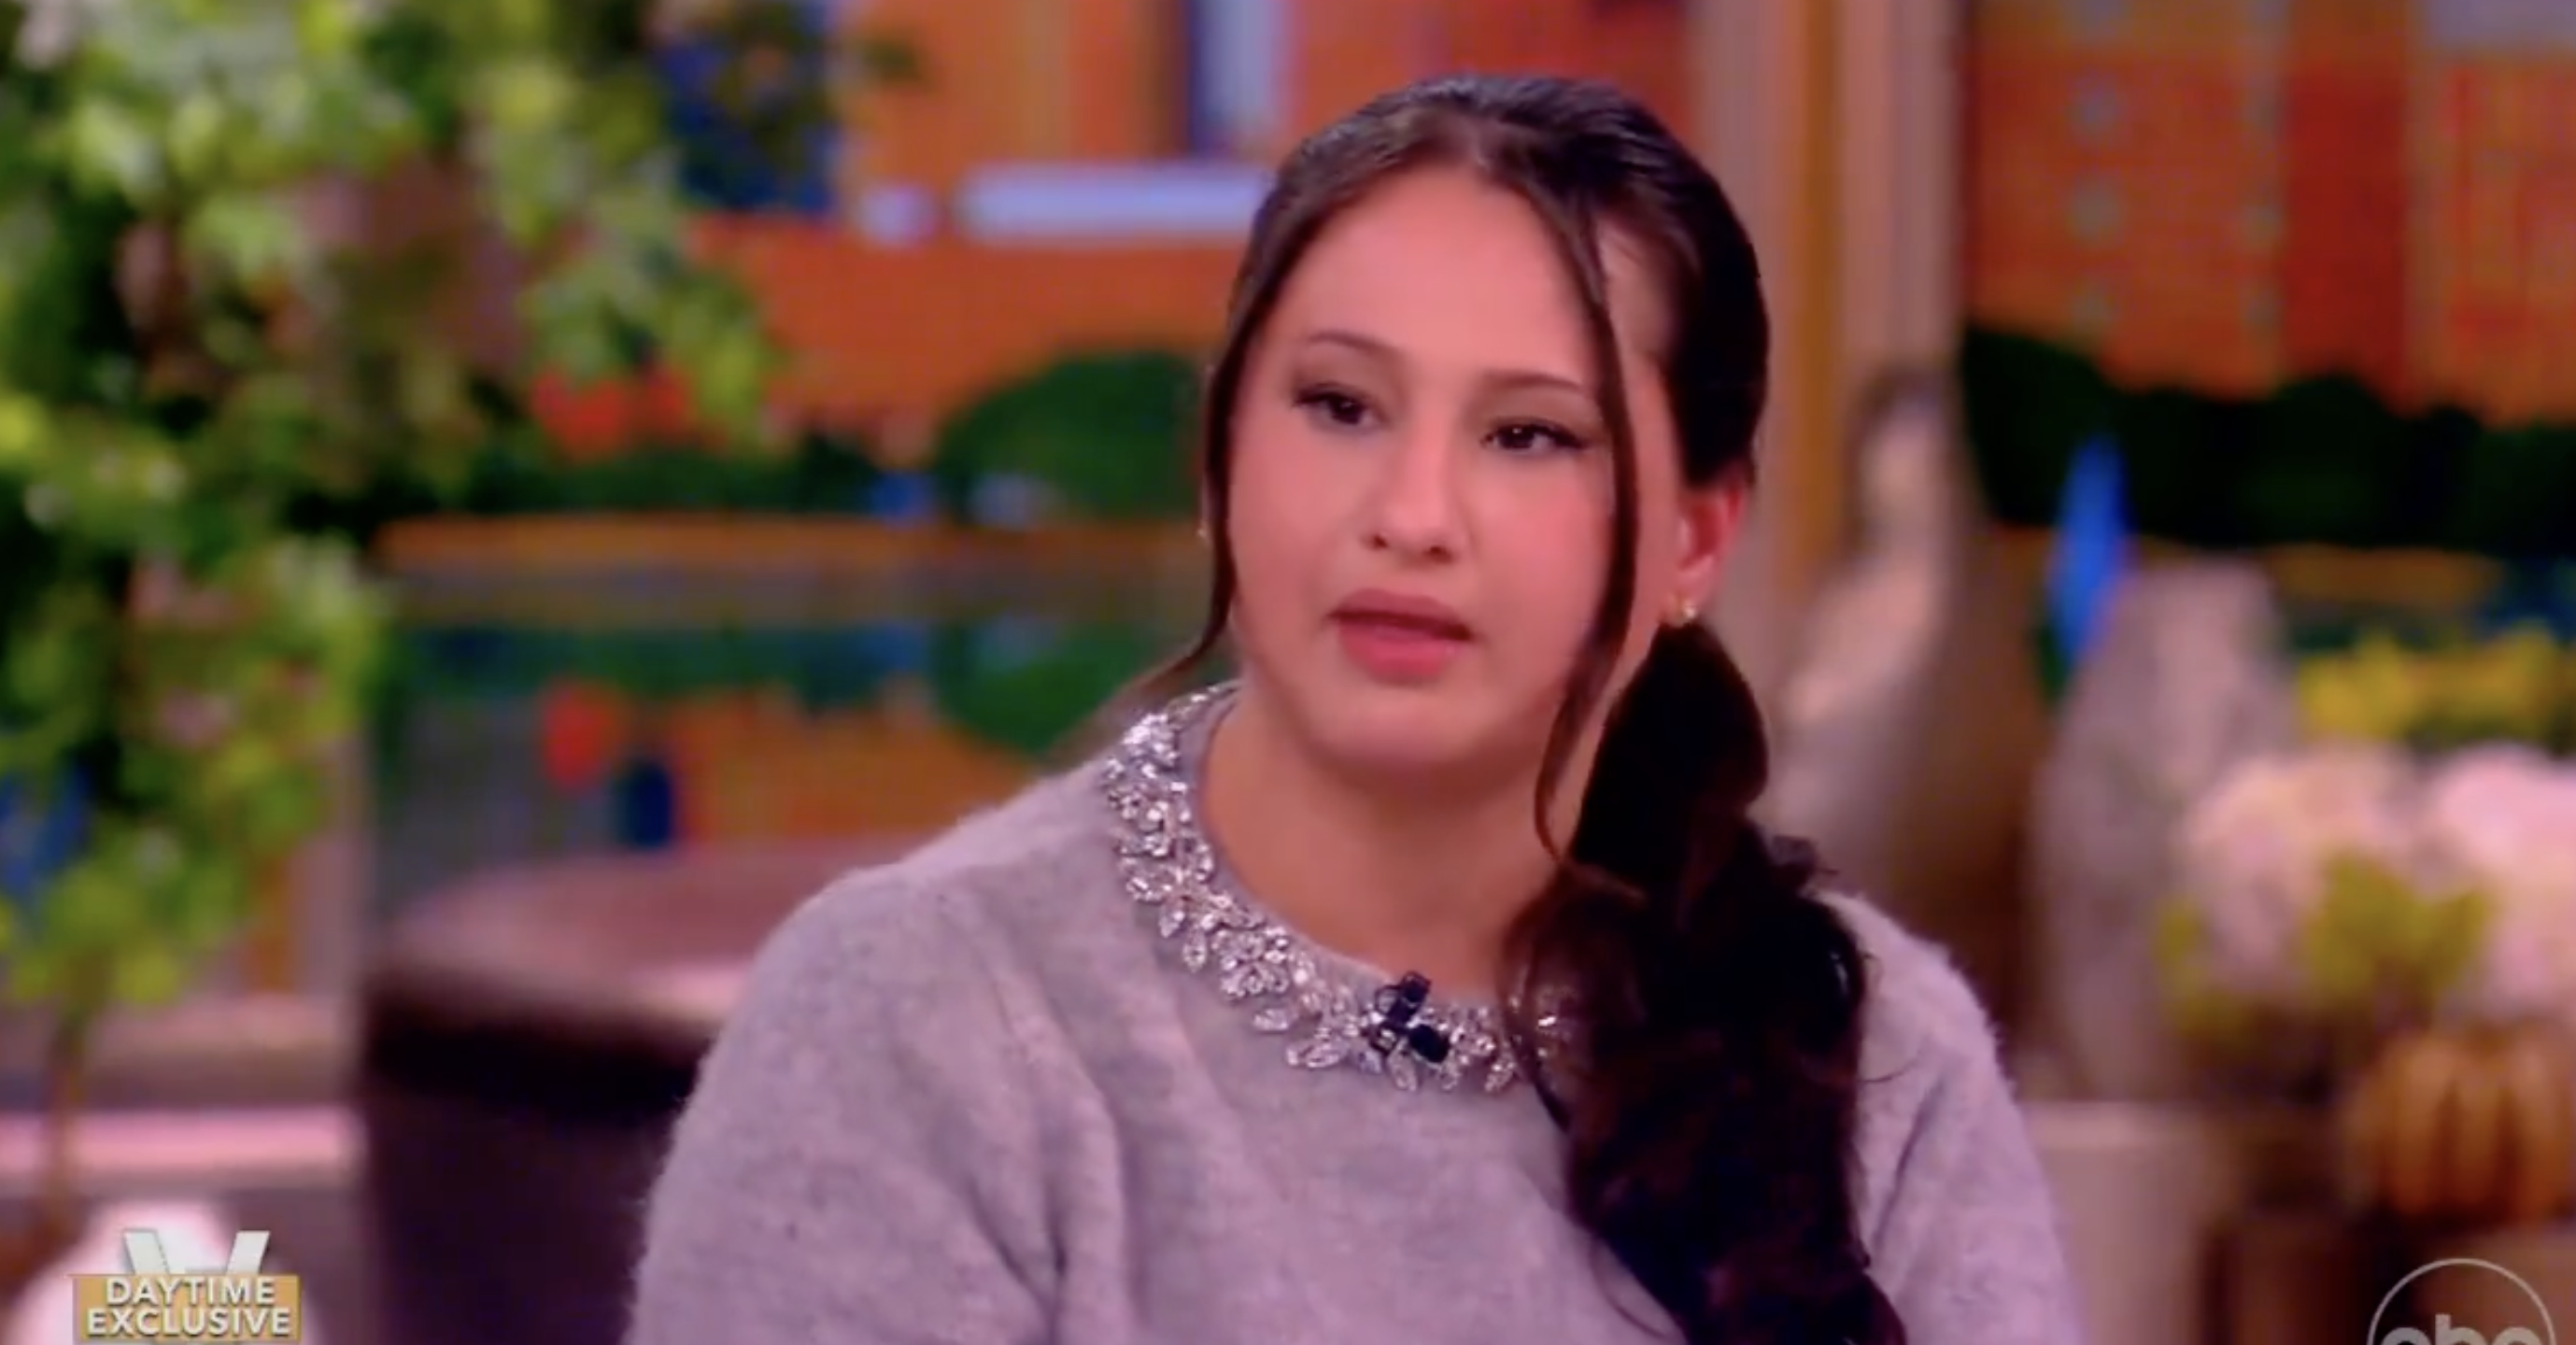 Close-up of Gypsy Rose on The View